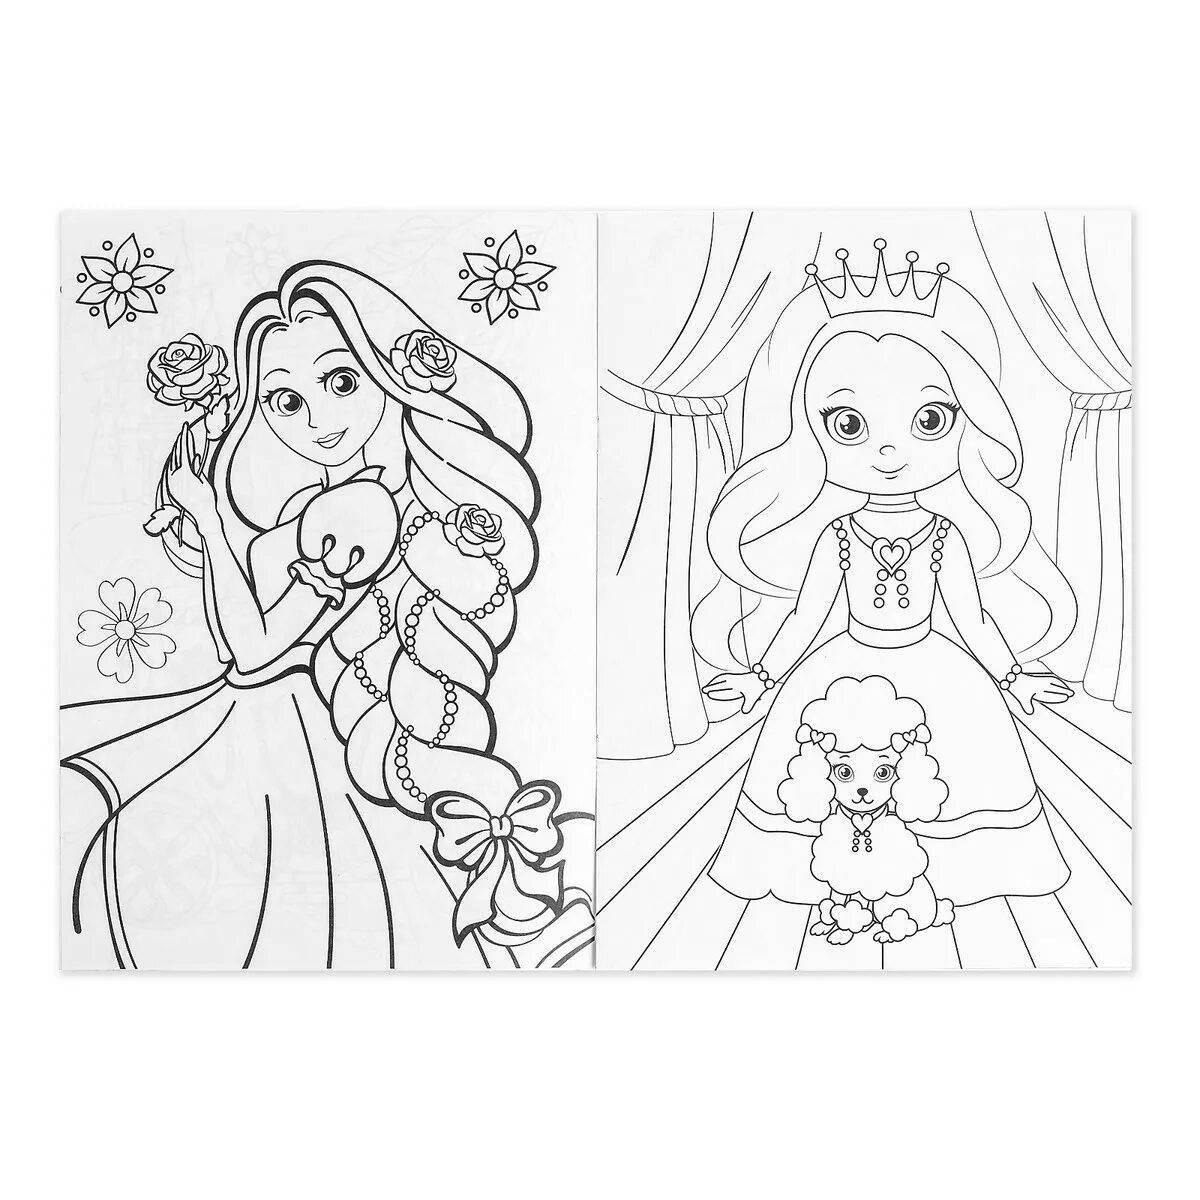 Charming doppelgänger coloring book for girls